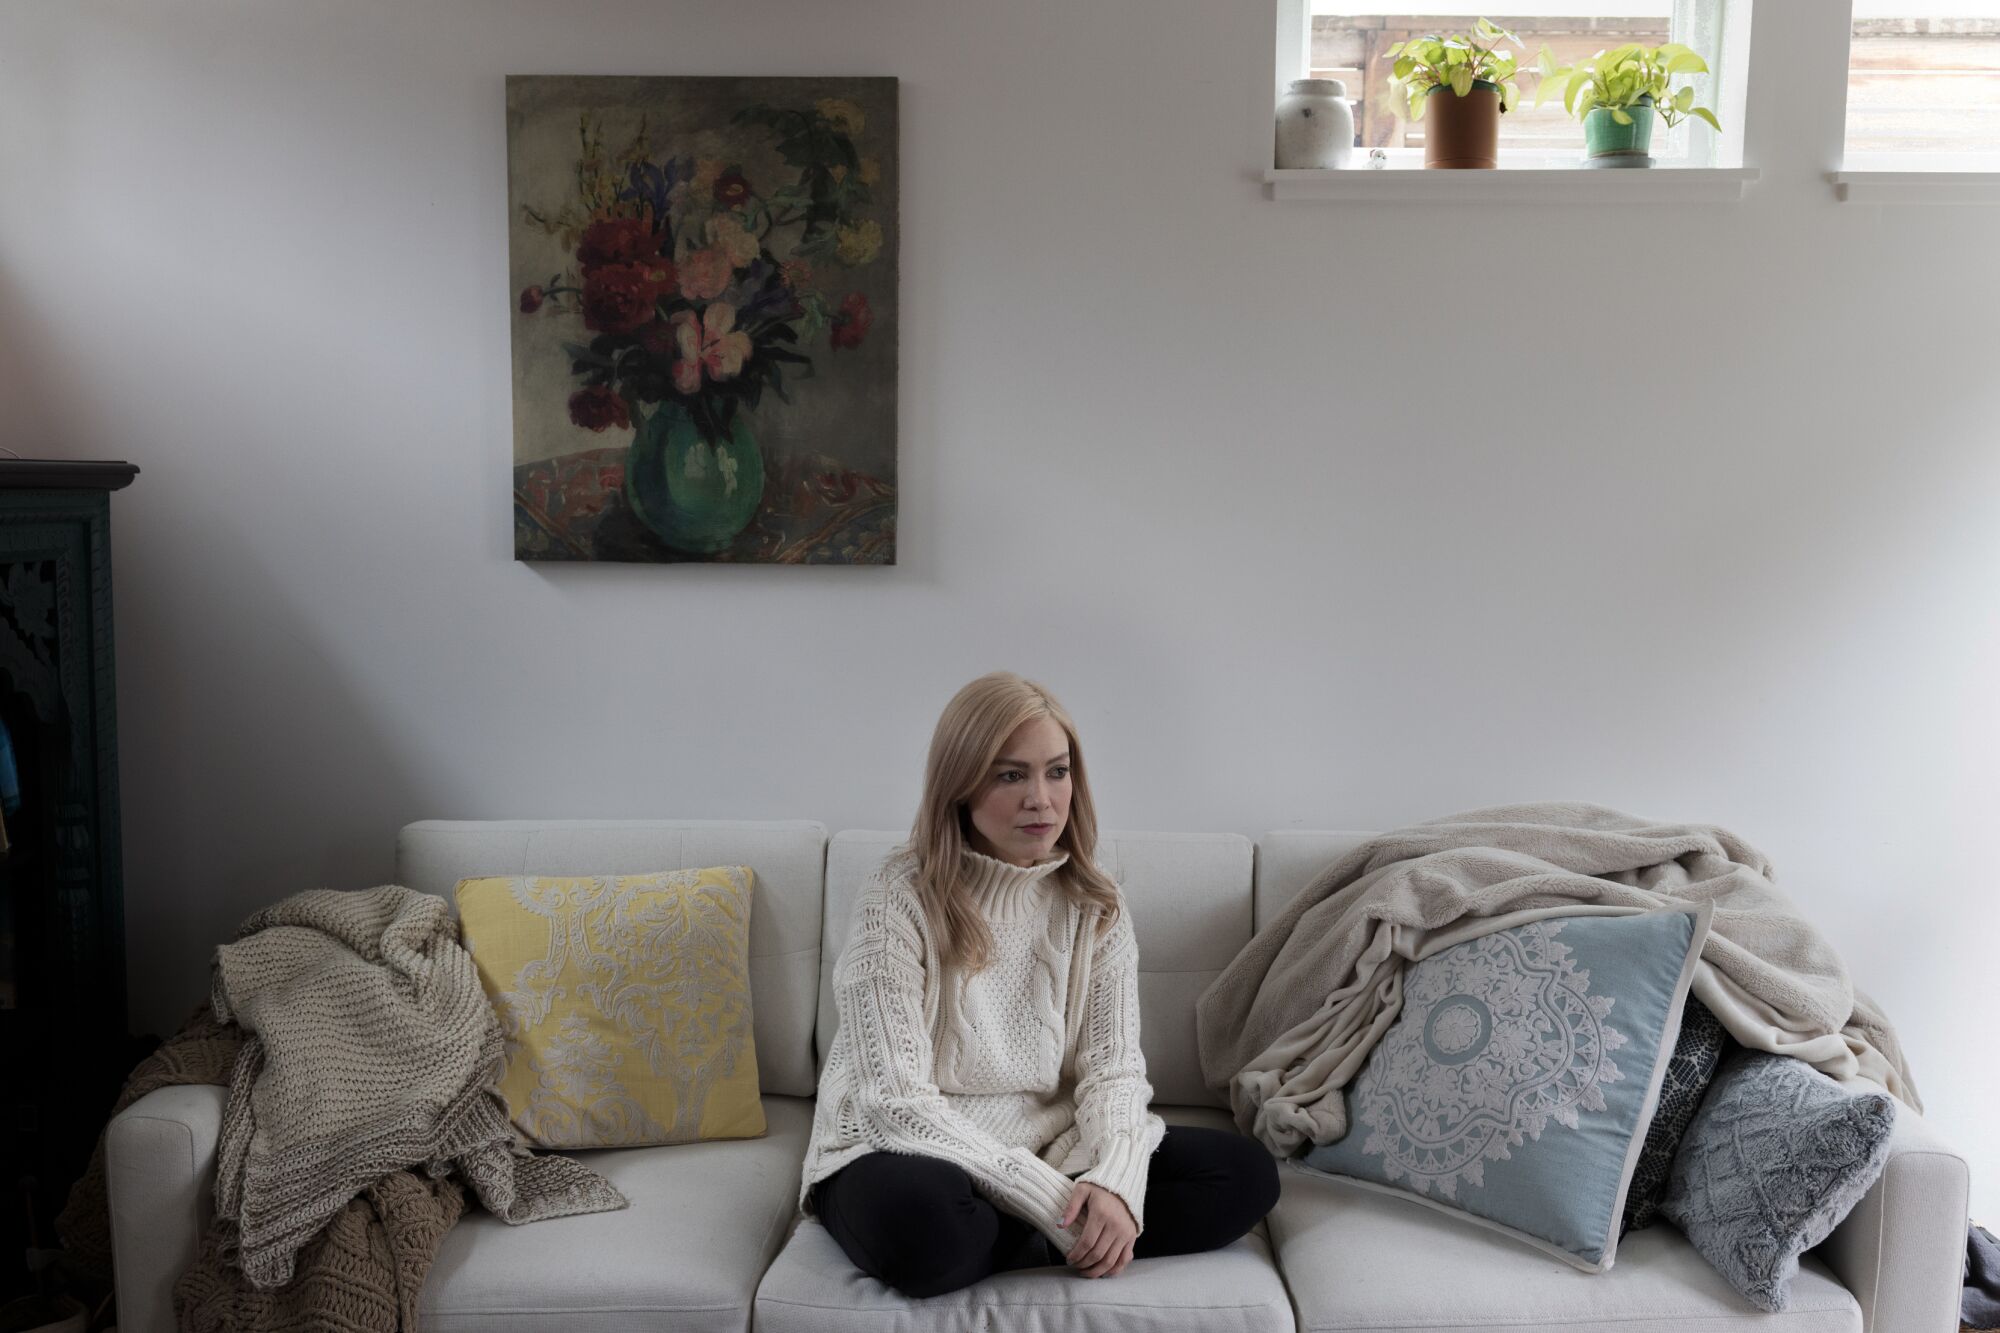 A blonde woman in a white cableknit sweater sits on a gray couch 